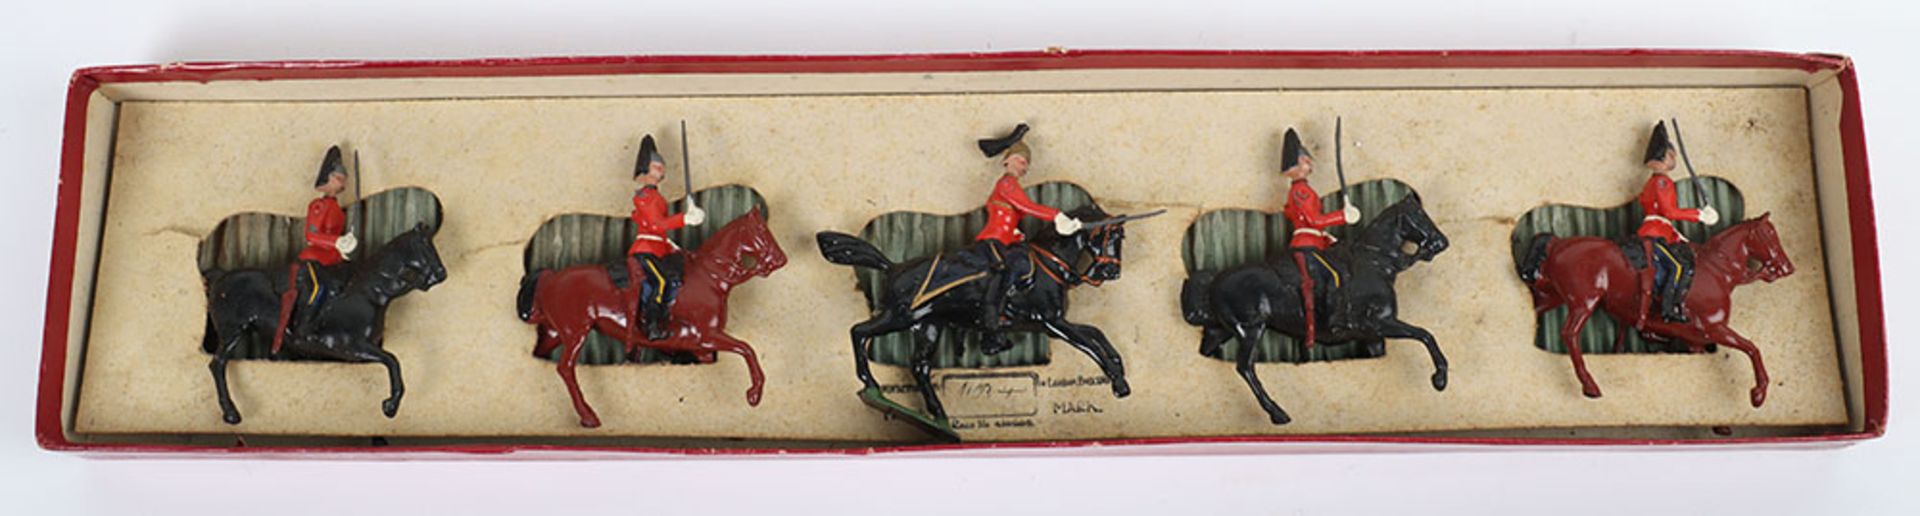 Britains and other Toy Soldiers including boxed set 32 Royal Scots Greys, 1930s - Image 5 of 5